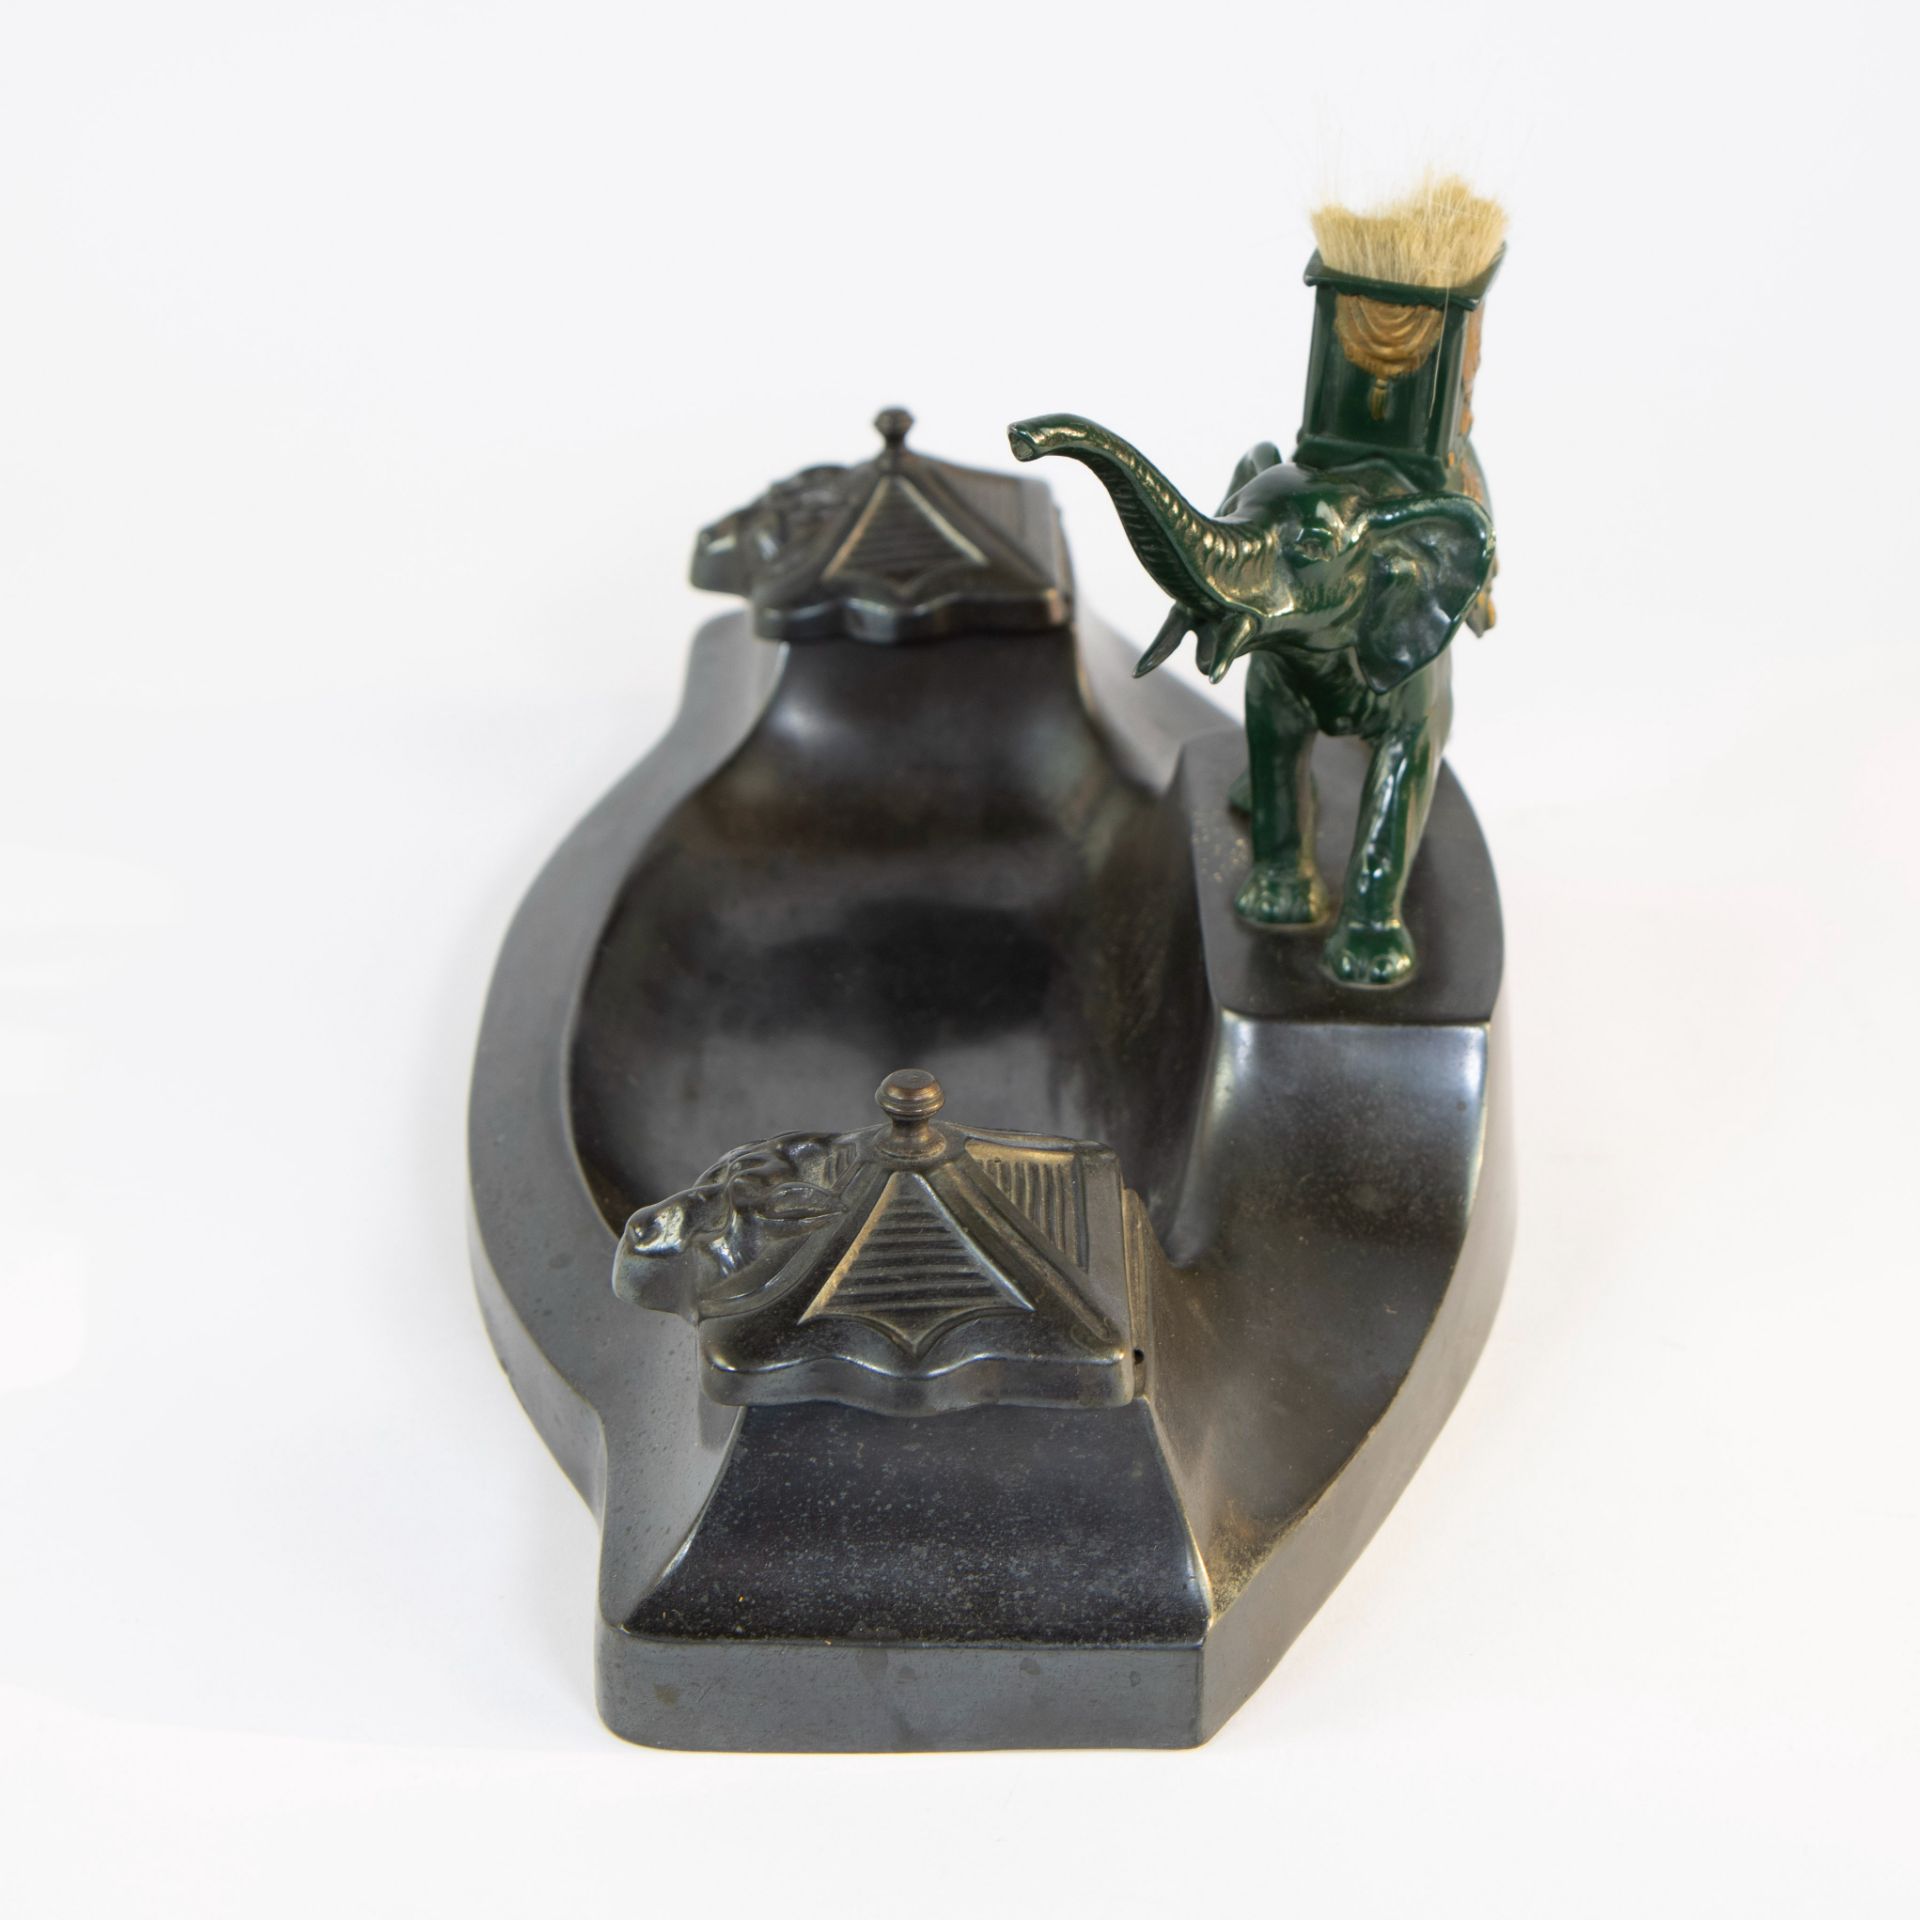 Art Deco inkwell with oriental decor, 1930s - Image 3 of 5